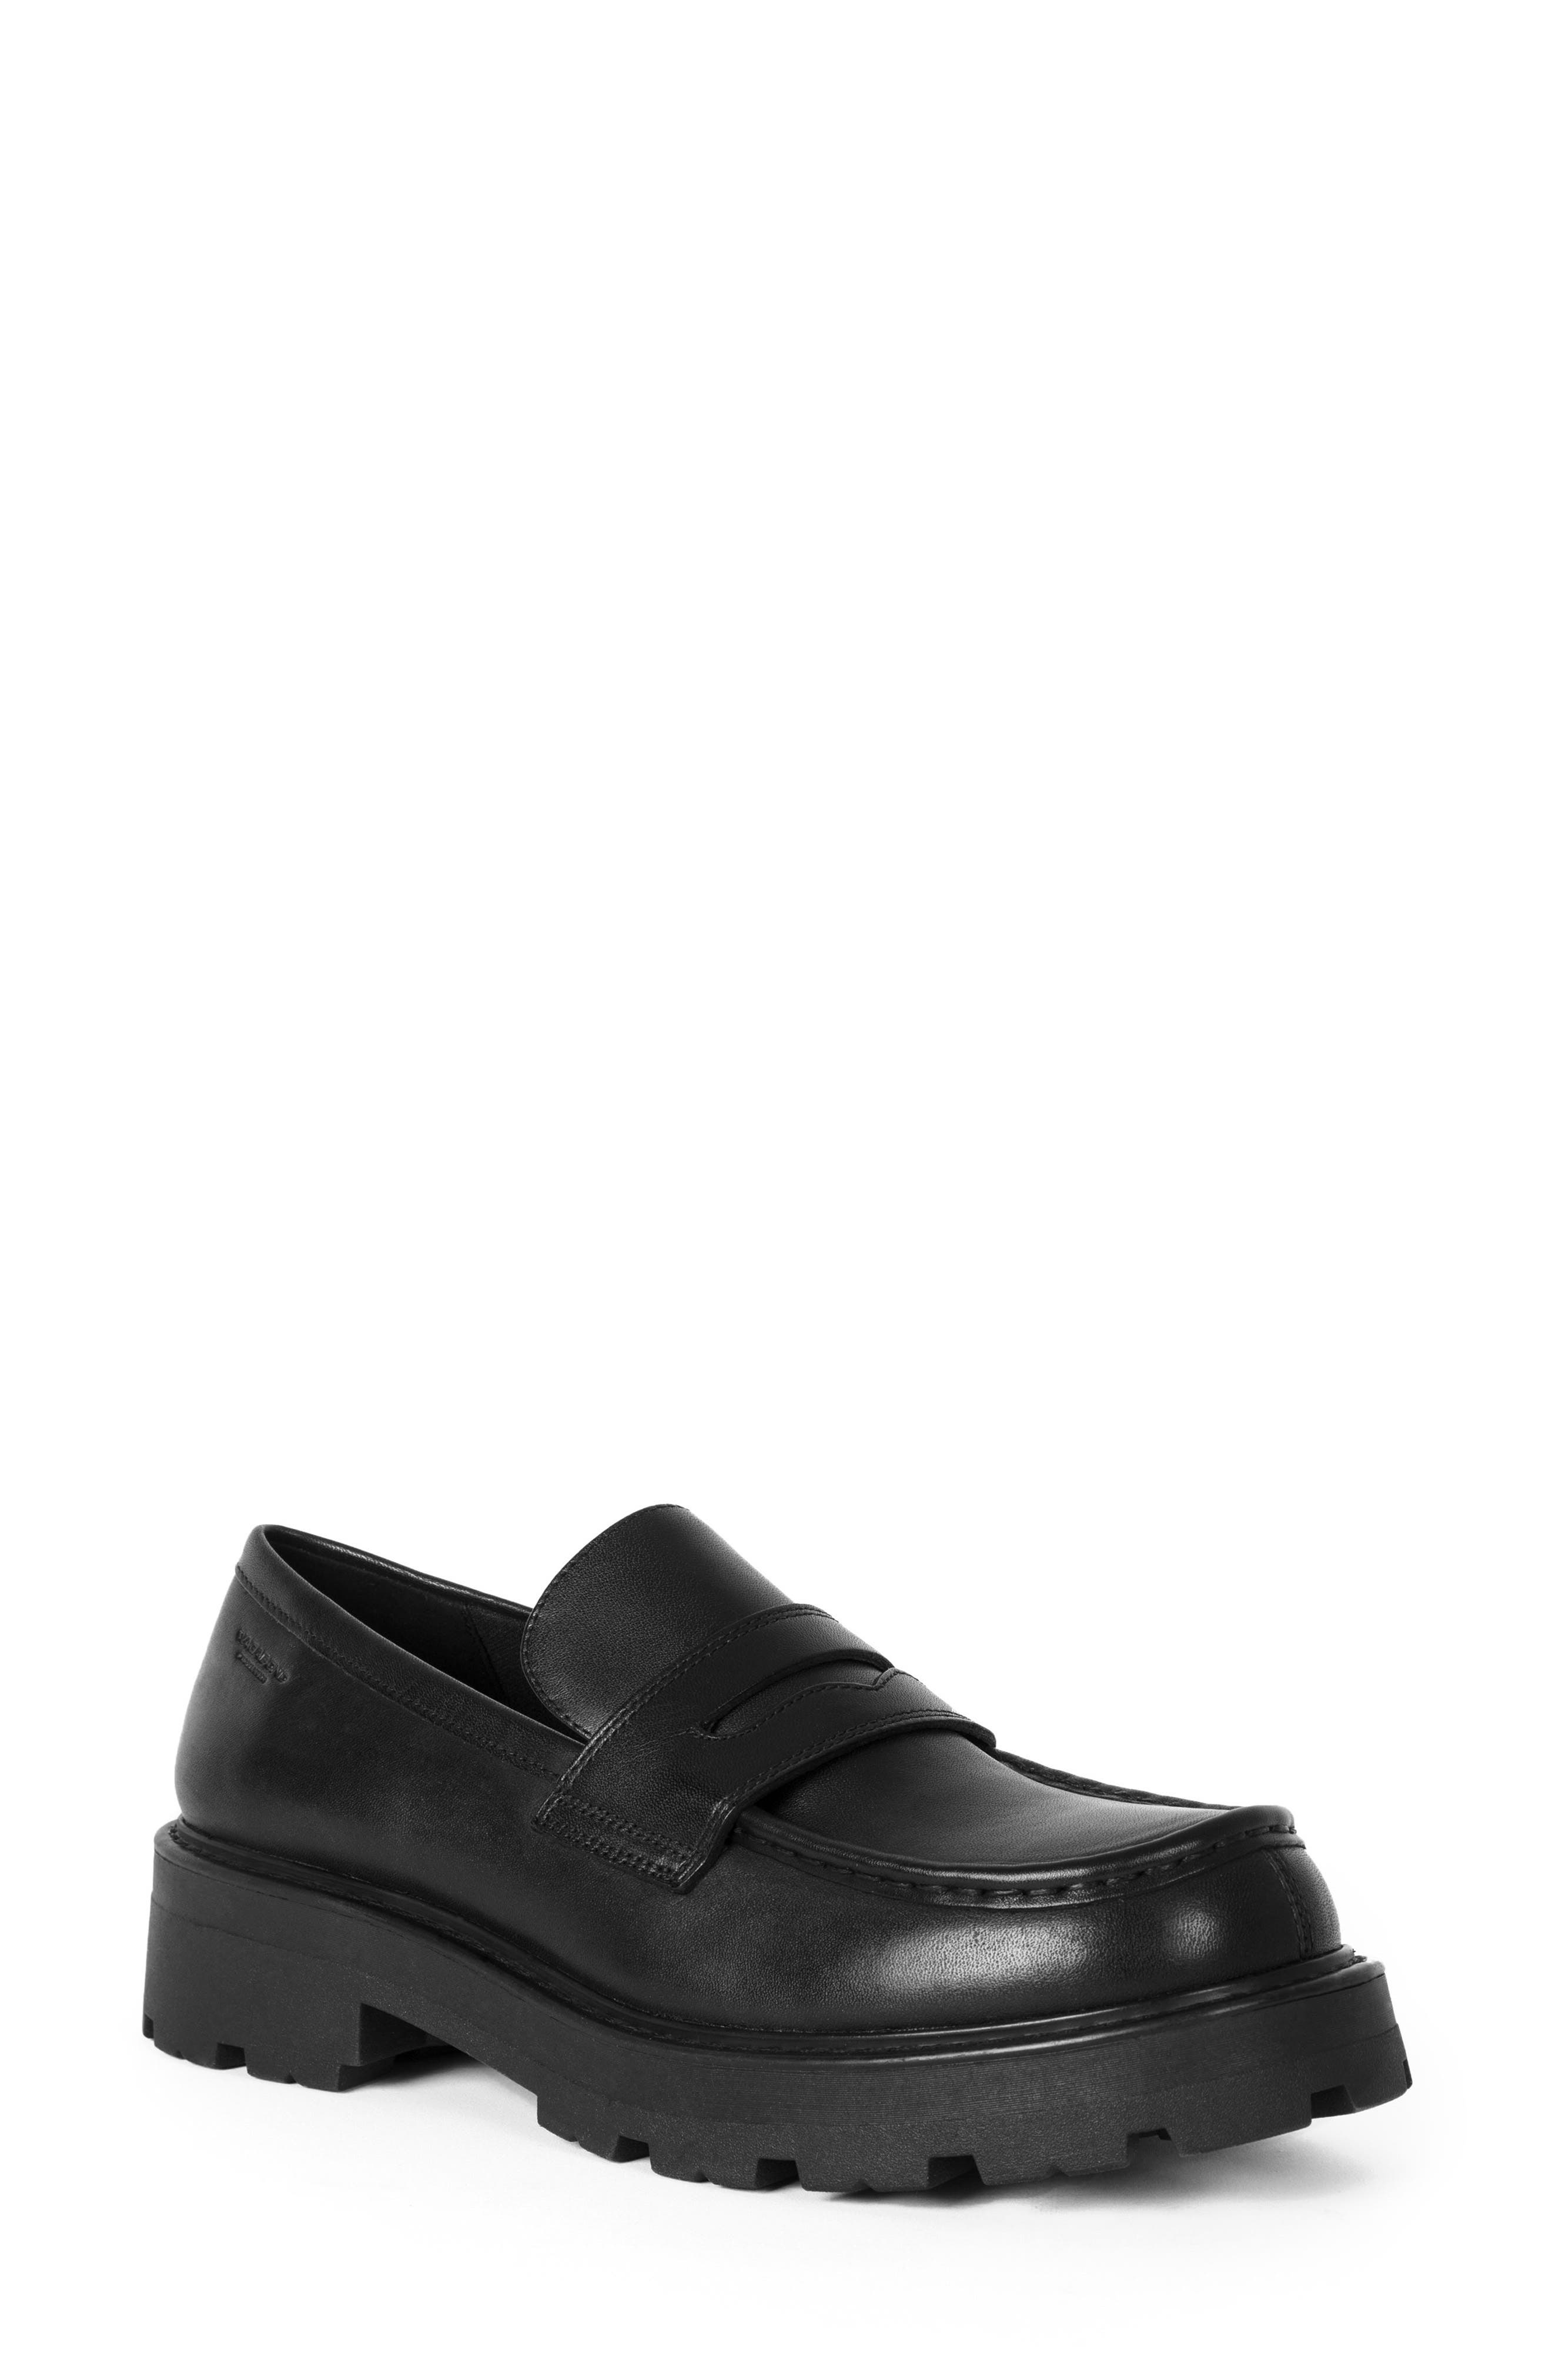 Vagabond Women's Ansie Patent Leather Heeled Mary Jane Shoes - Black